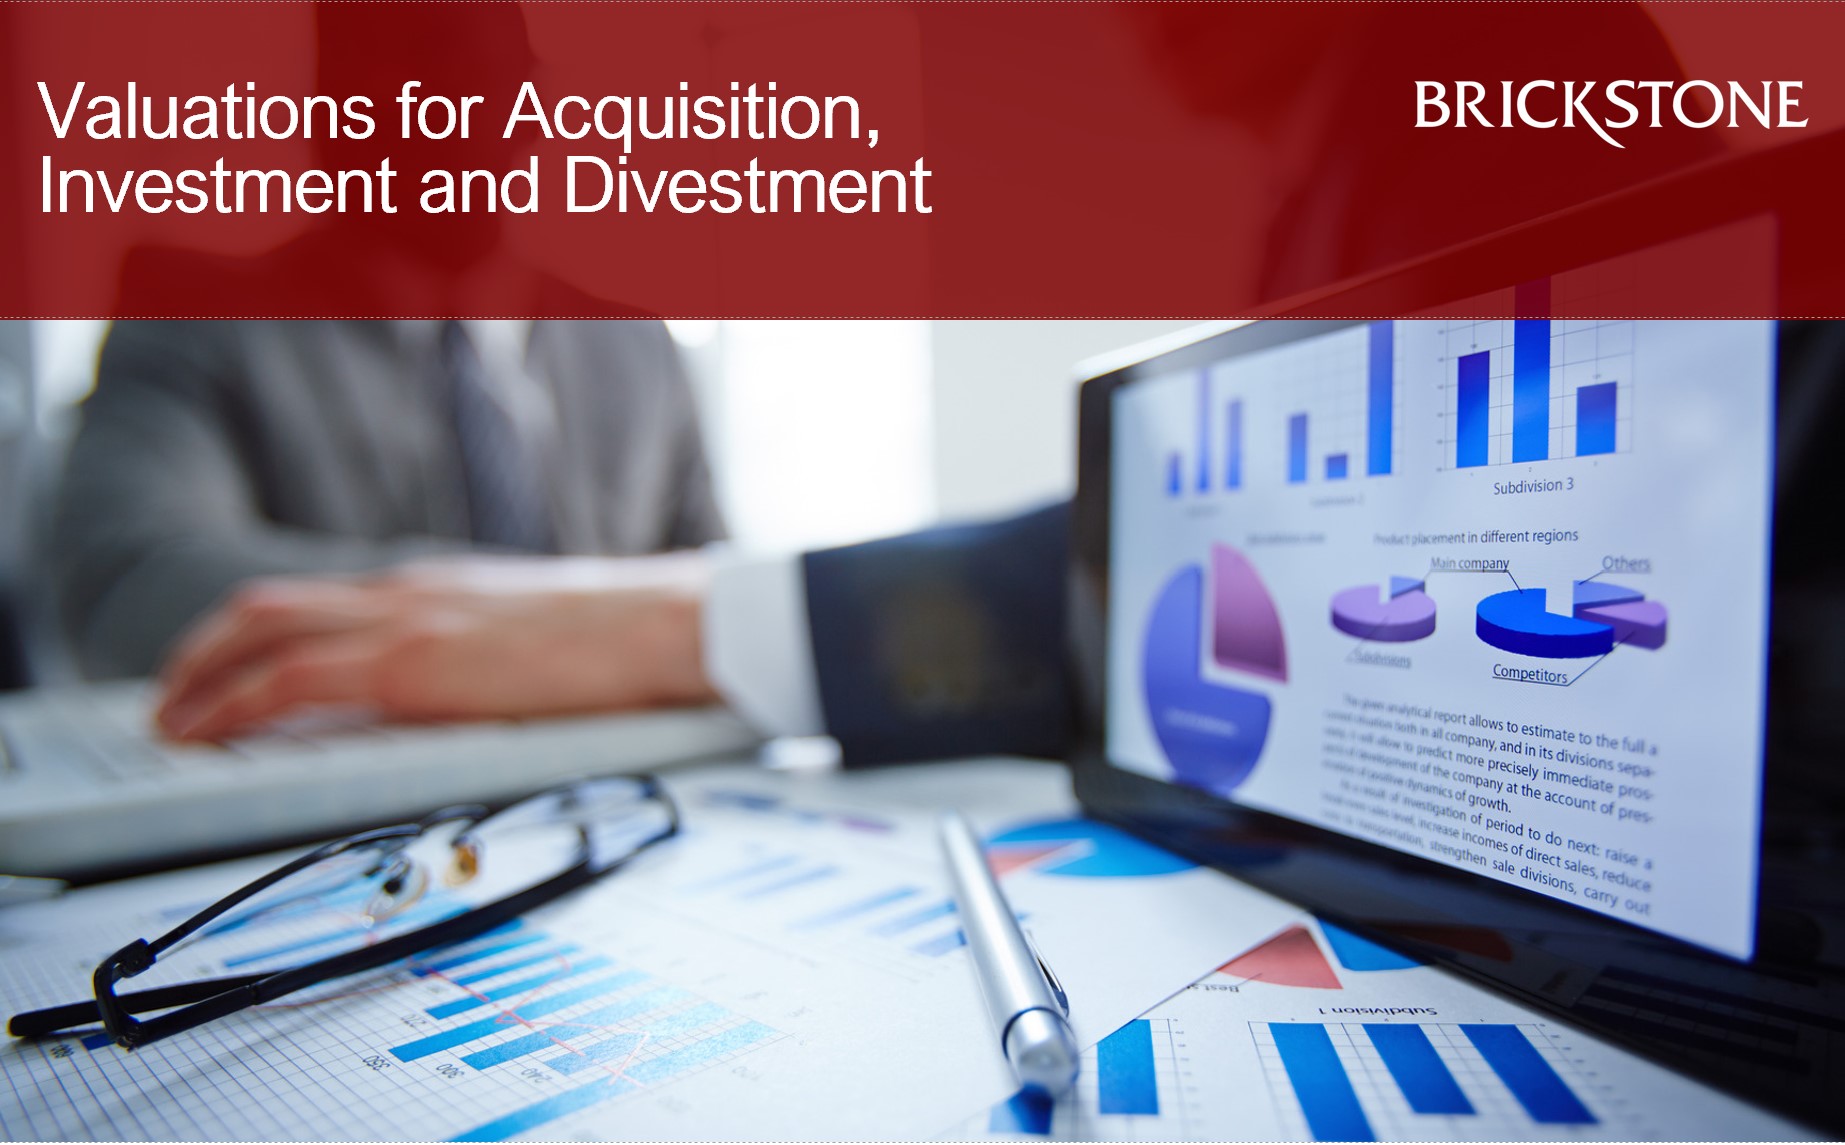 Valuations for Acquisition, Investment and Divestments_Brickstone Africa